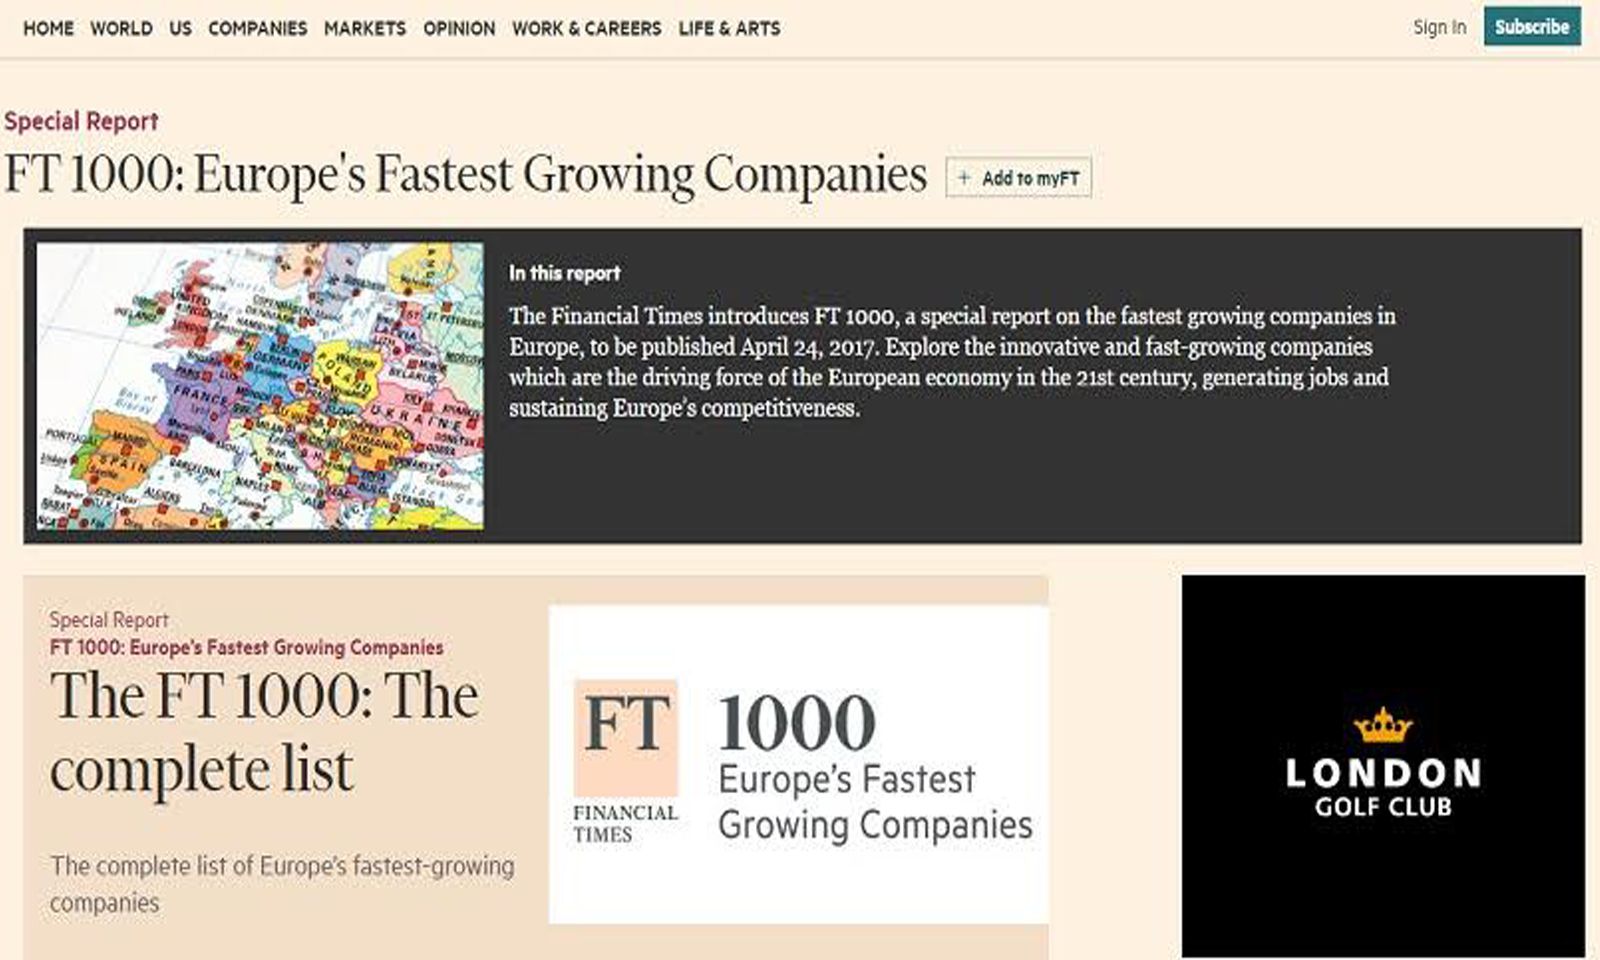 ExoClick Ranked 523 in 'Financial Times' 1000